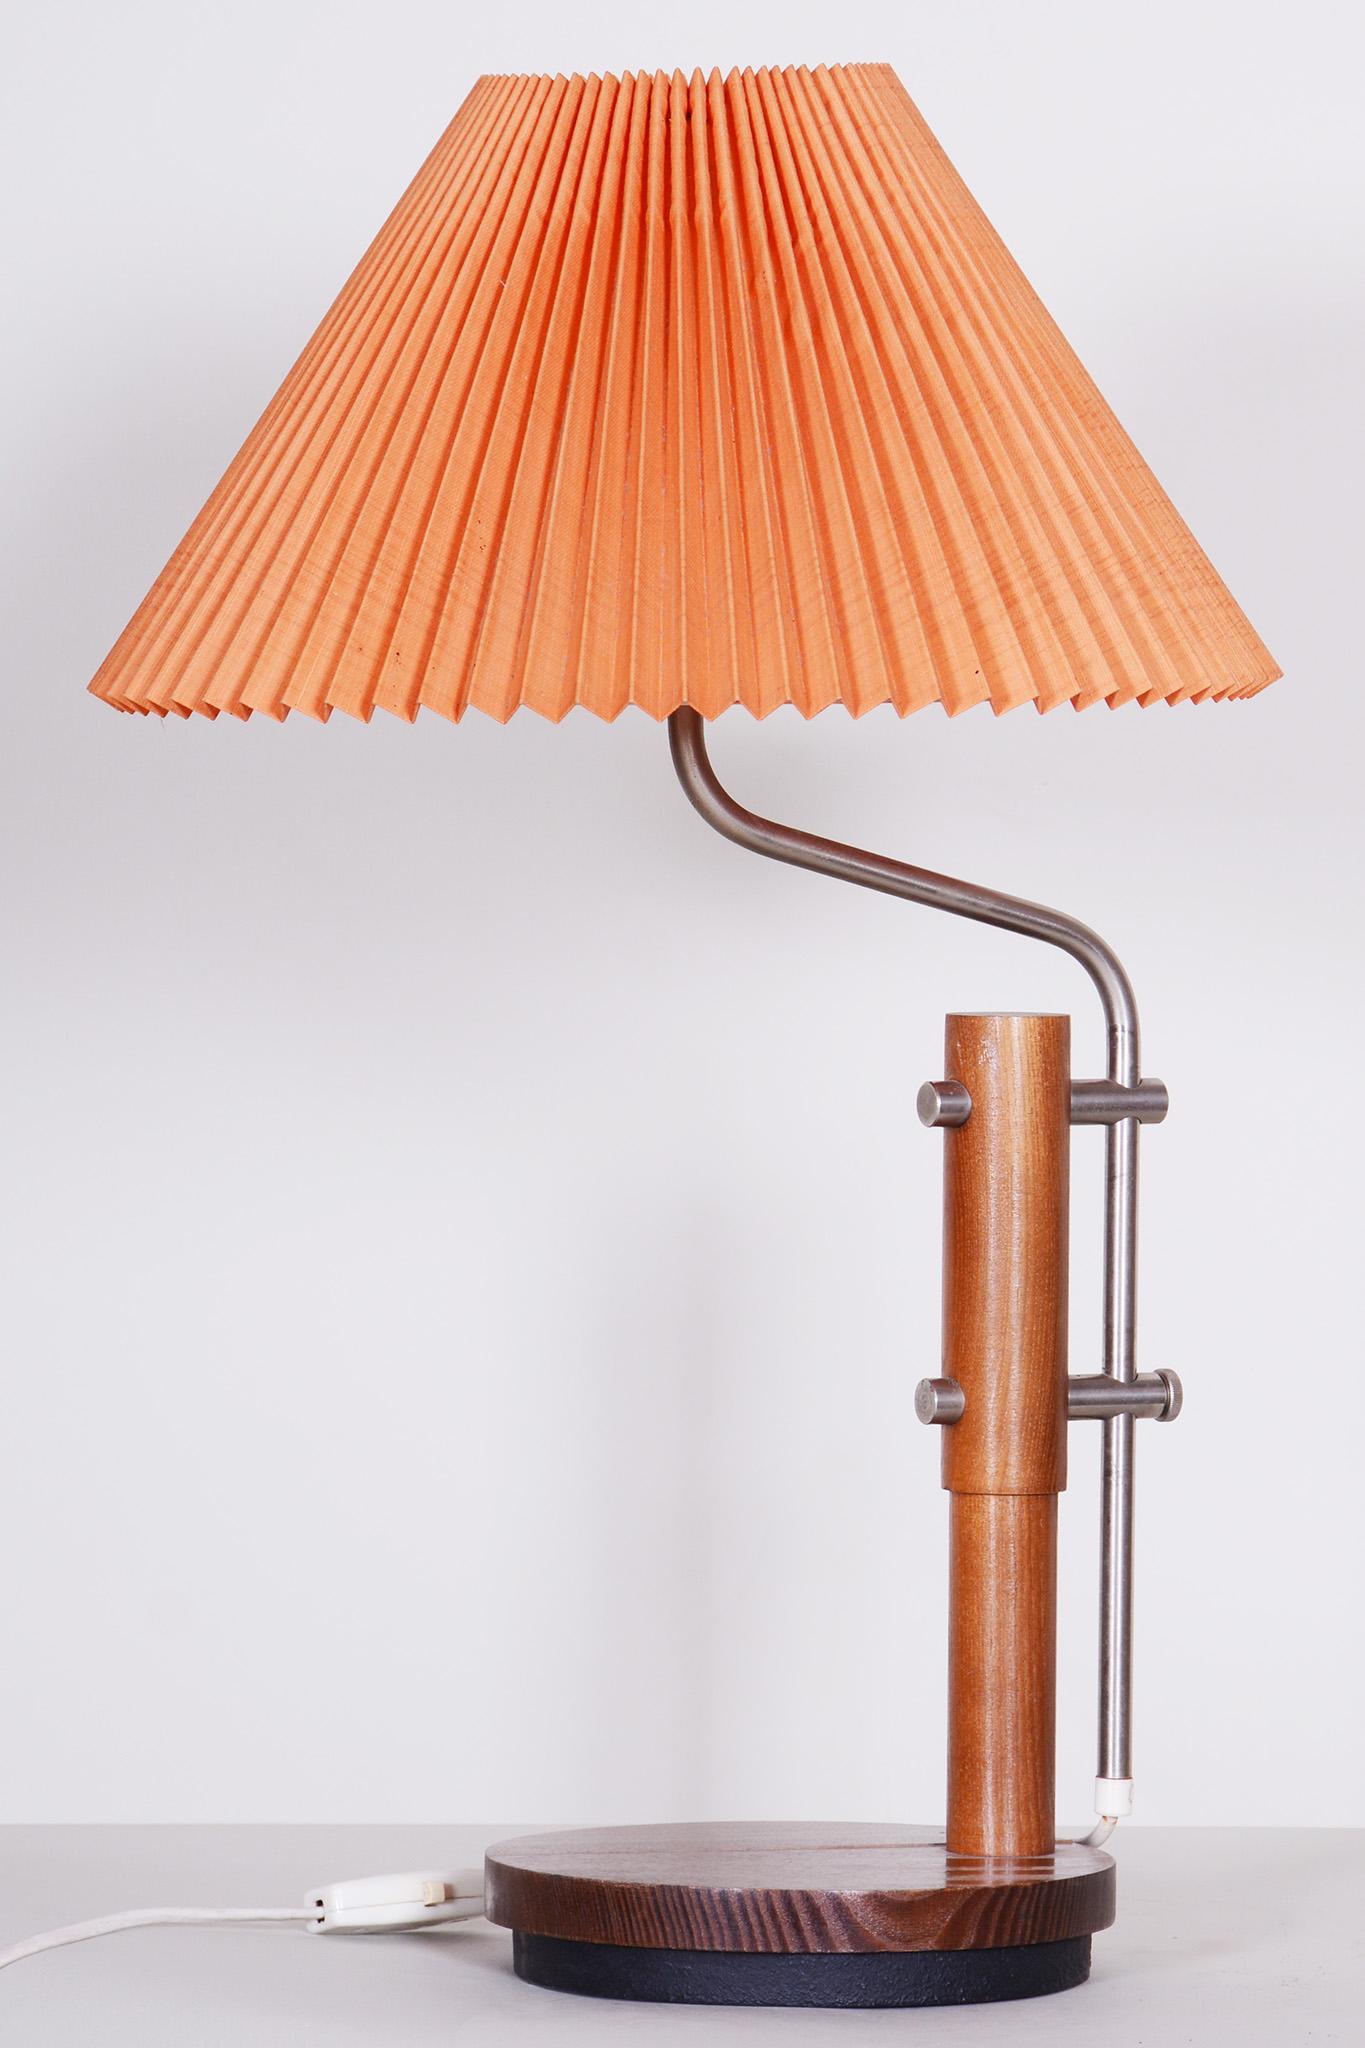 Mid-Century Modern Midcentury Table Lamp, Beech Galvanized Metal, Fully Functional, Czechia, 1960s For Sale